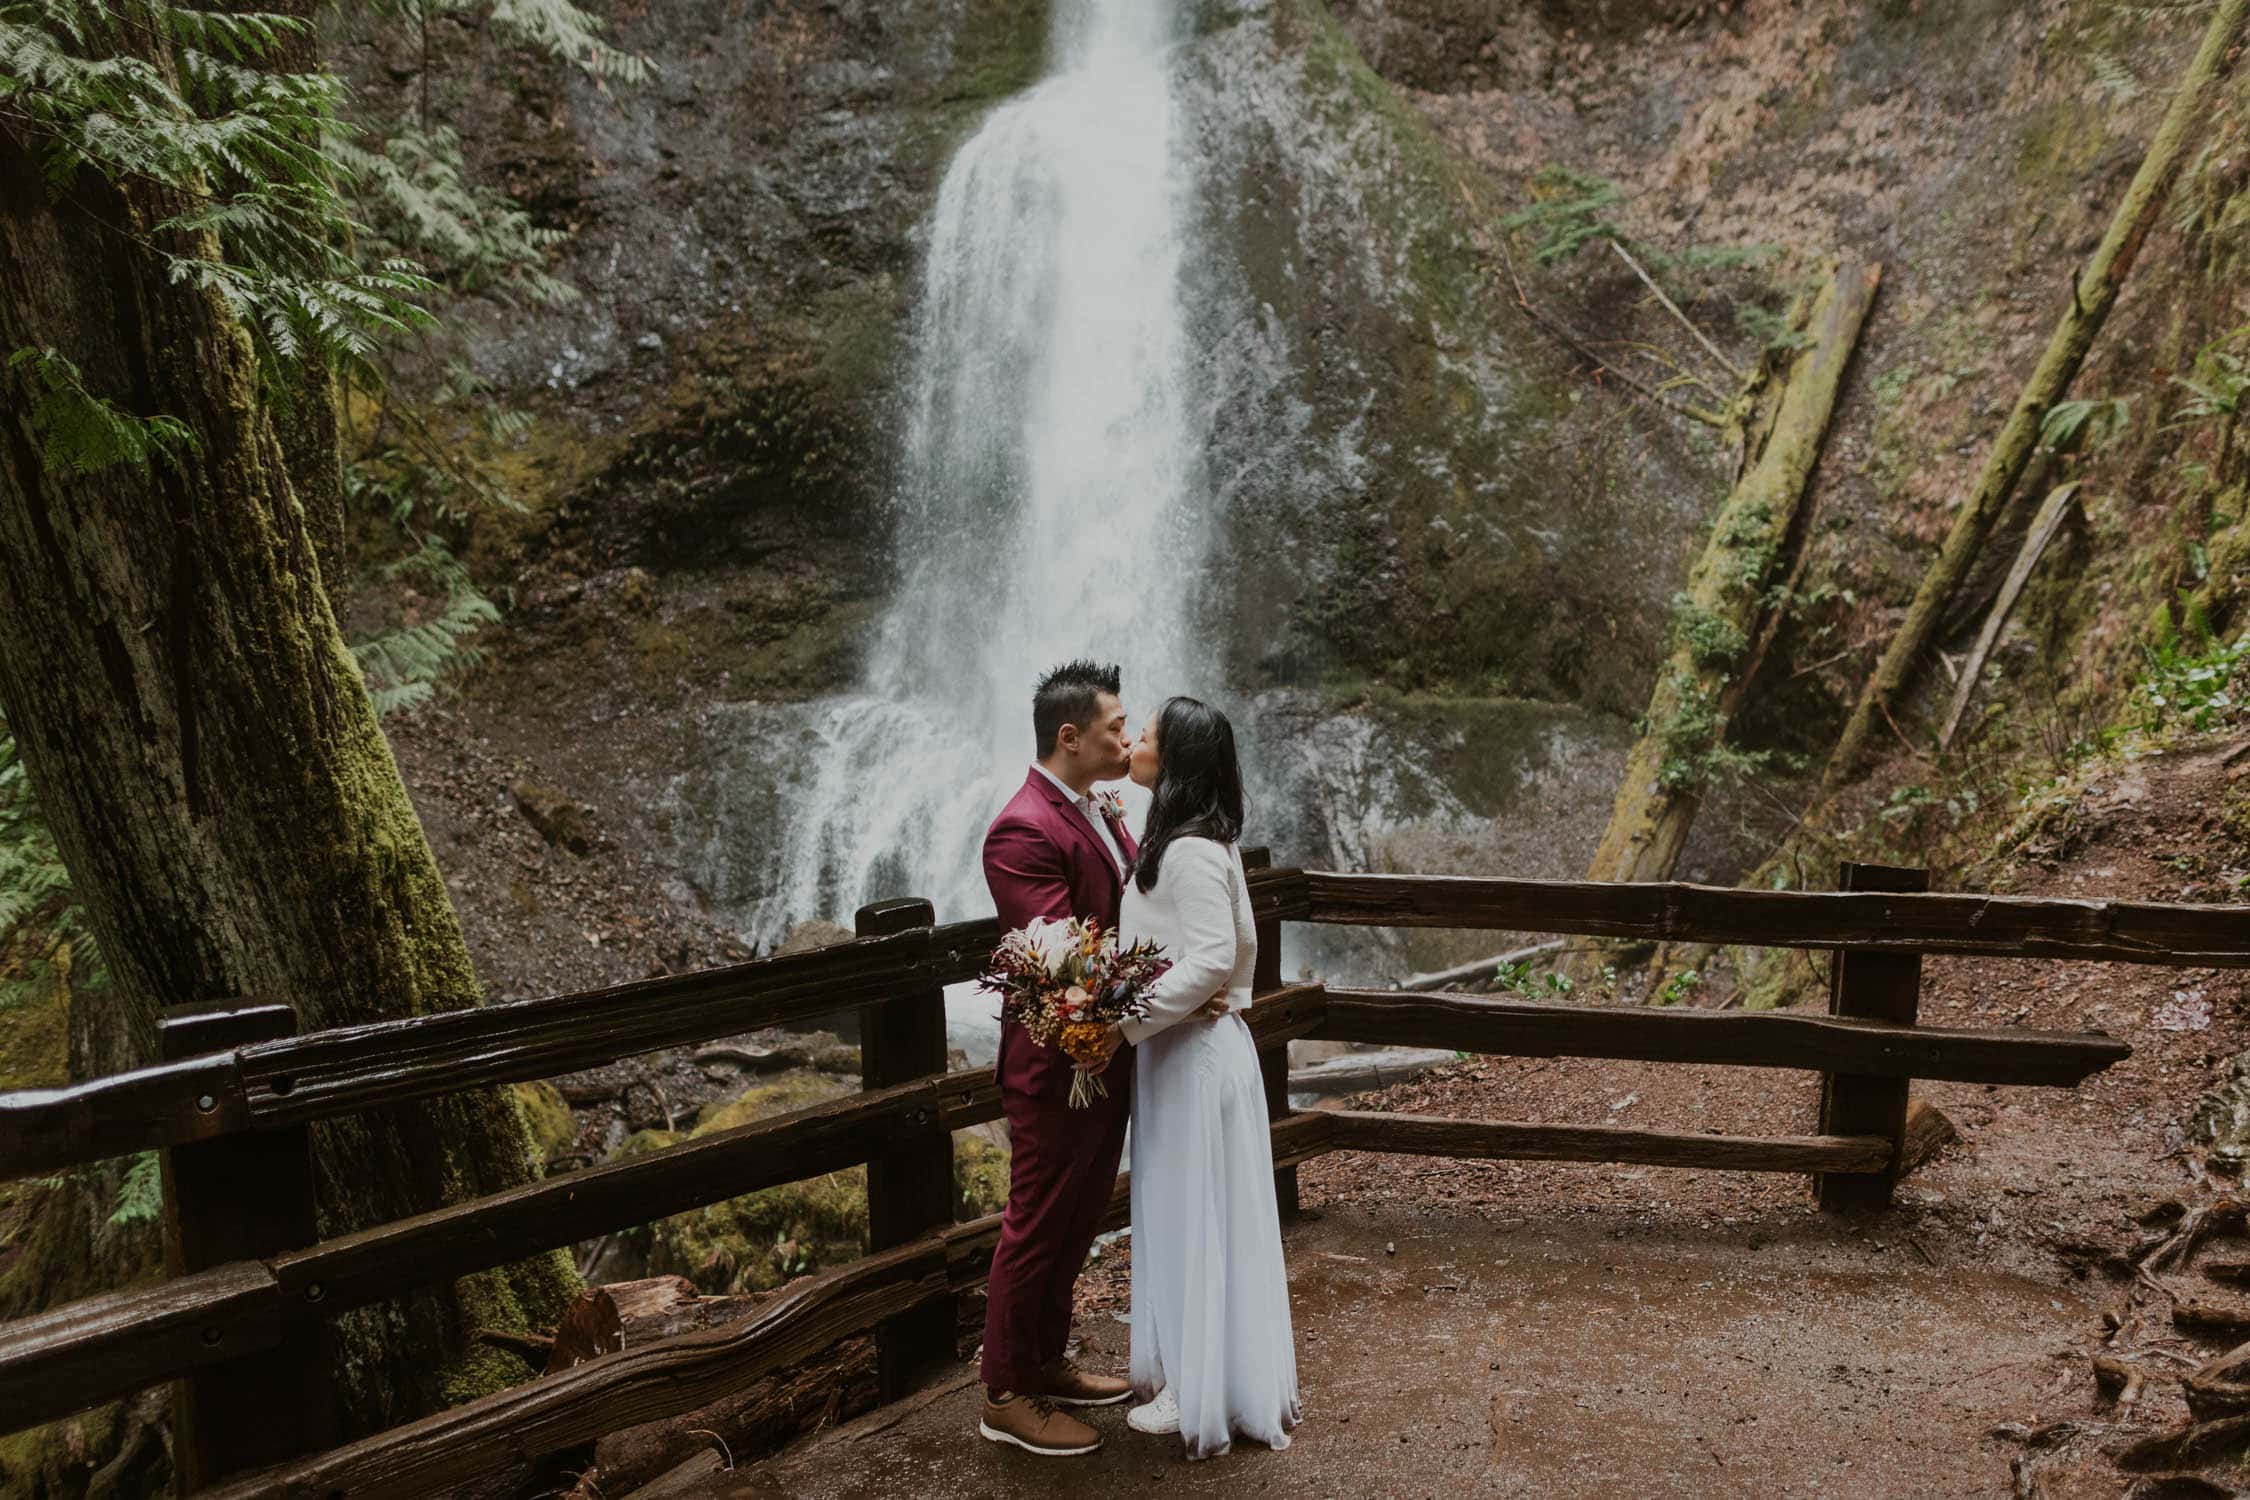 A bride and groom kissing in front of Marymere Falls.